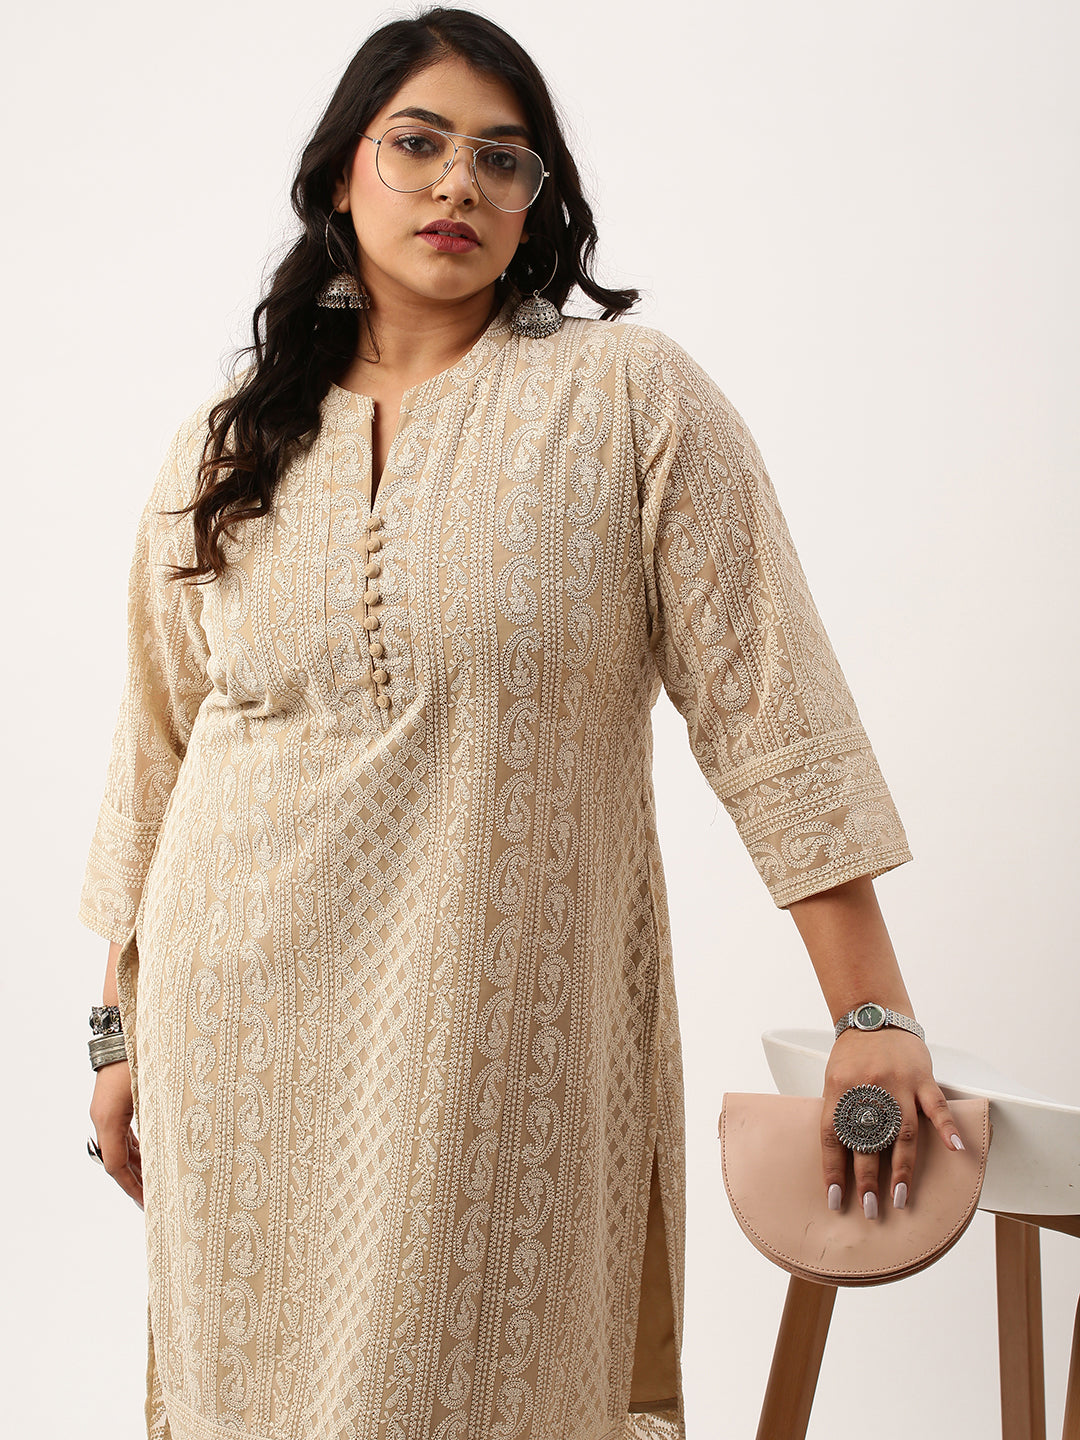 🌸PLUS SIZES... - Dip Pure Handwork Lucknowi Collections. | Facebook